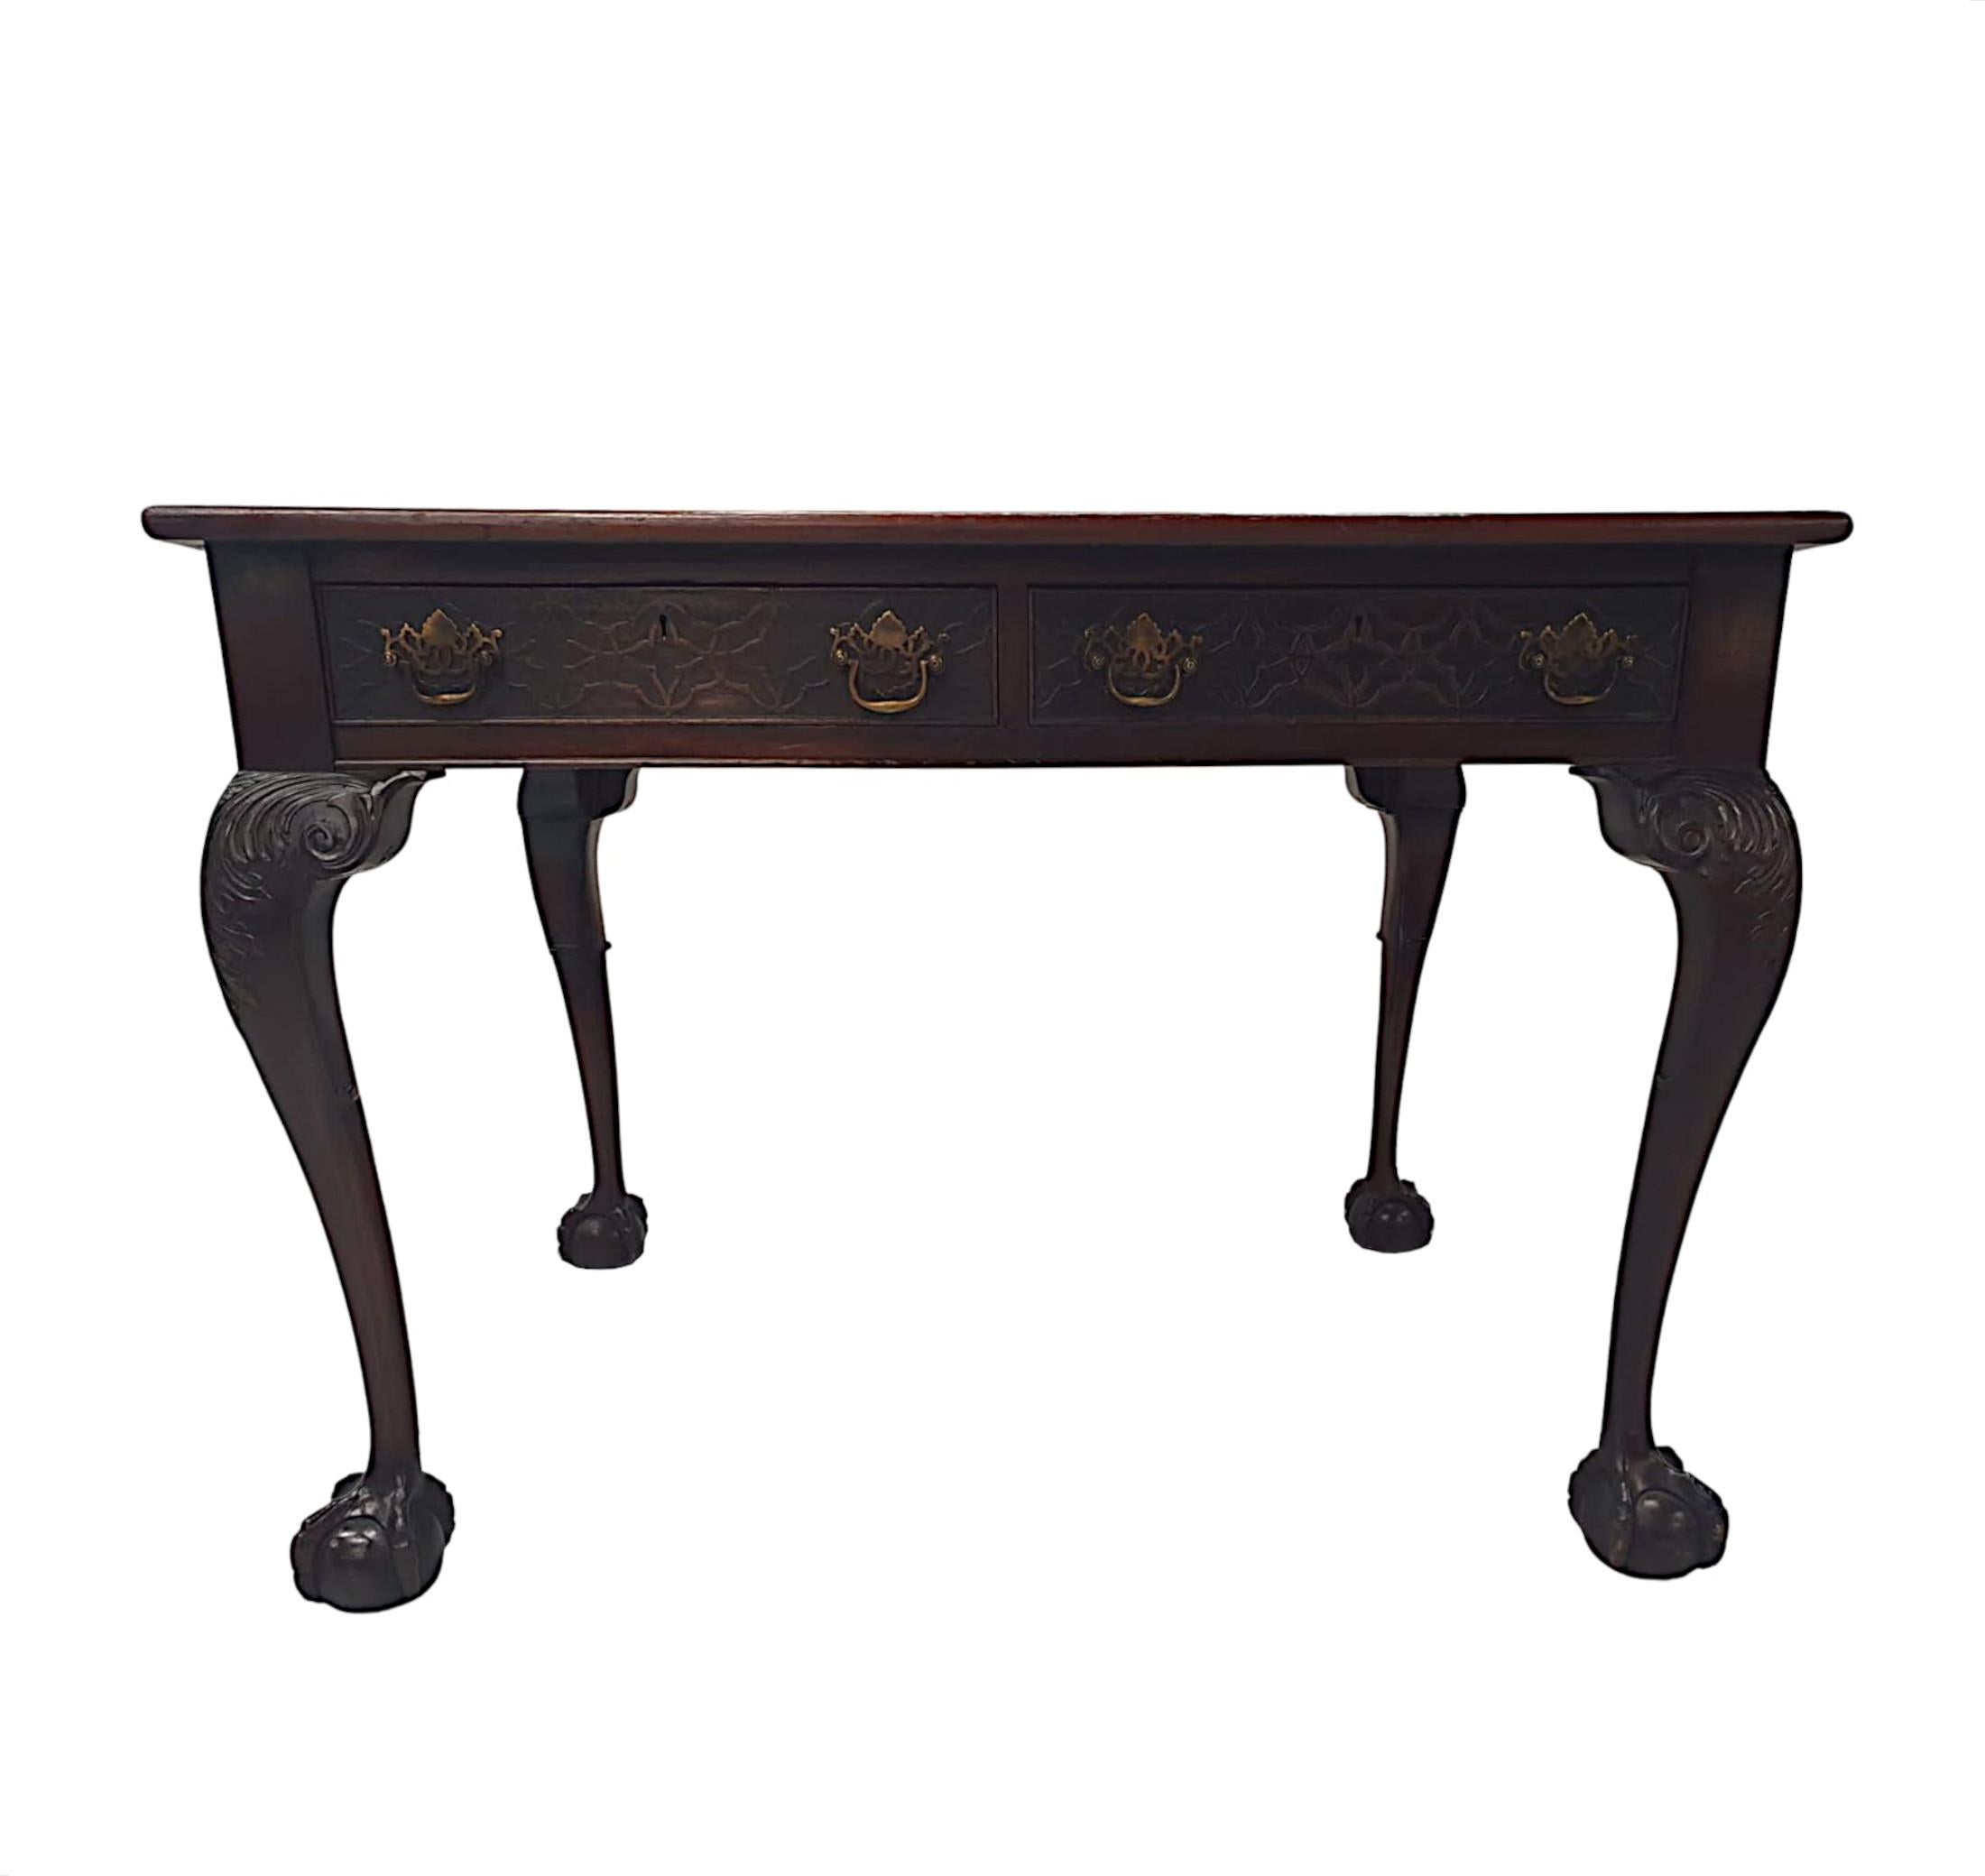 Stunning Late 19th Century Desk in the Thomas Chippendale Manner For Sale 8